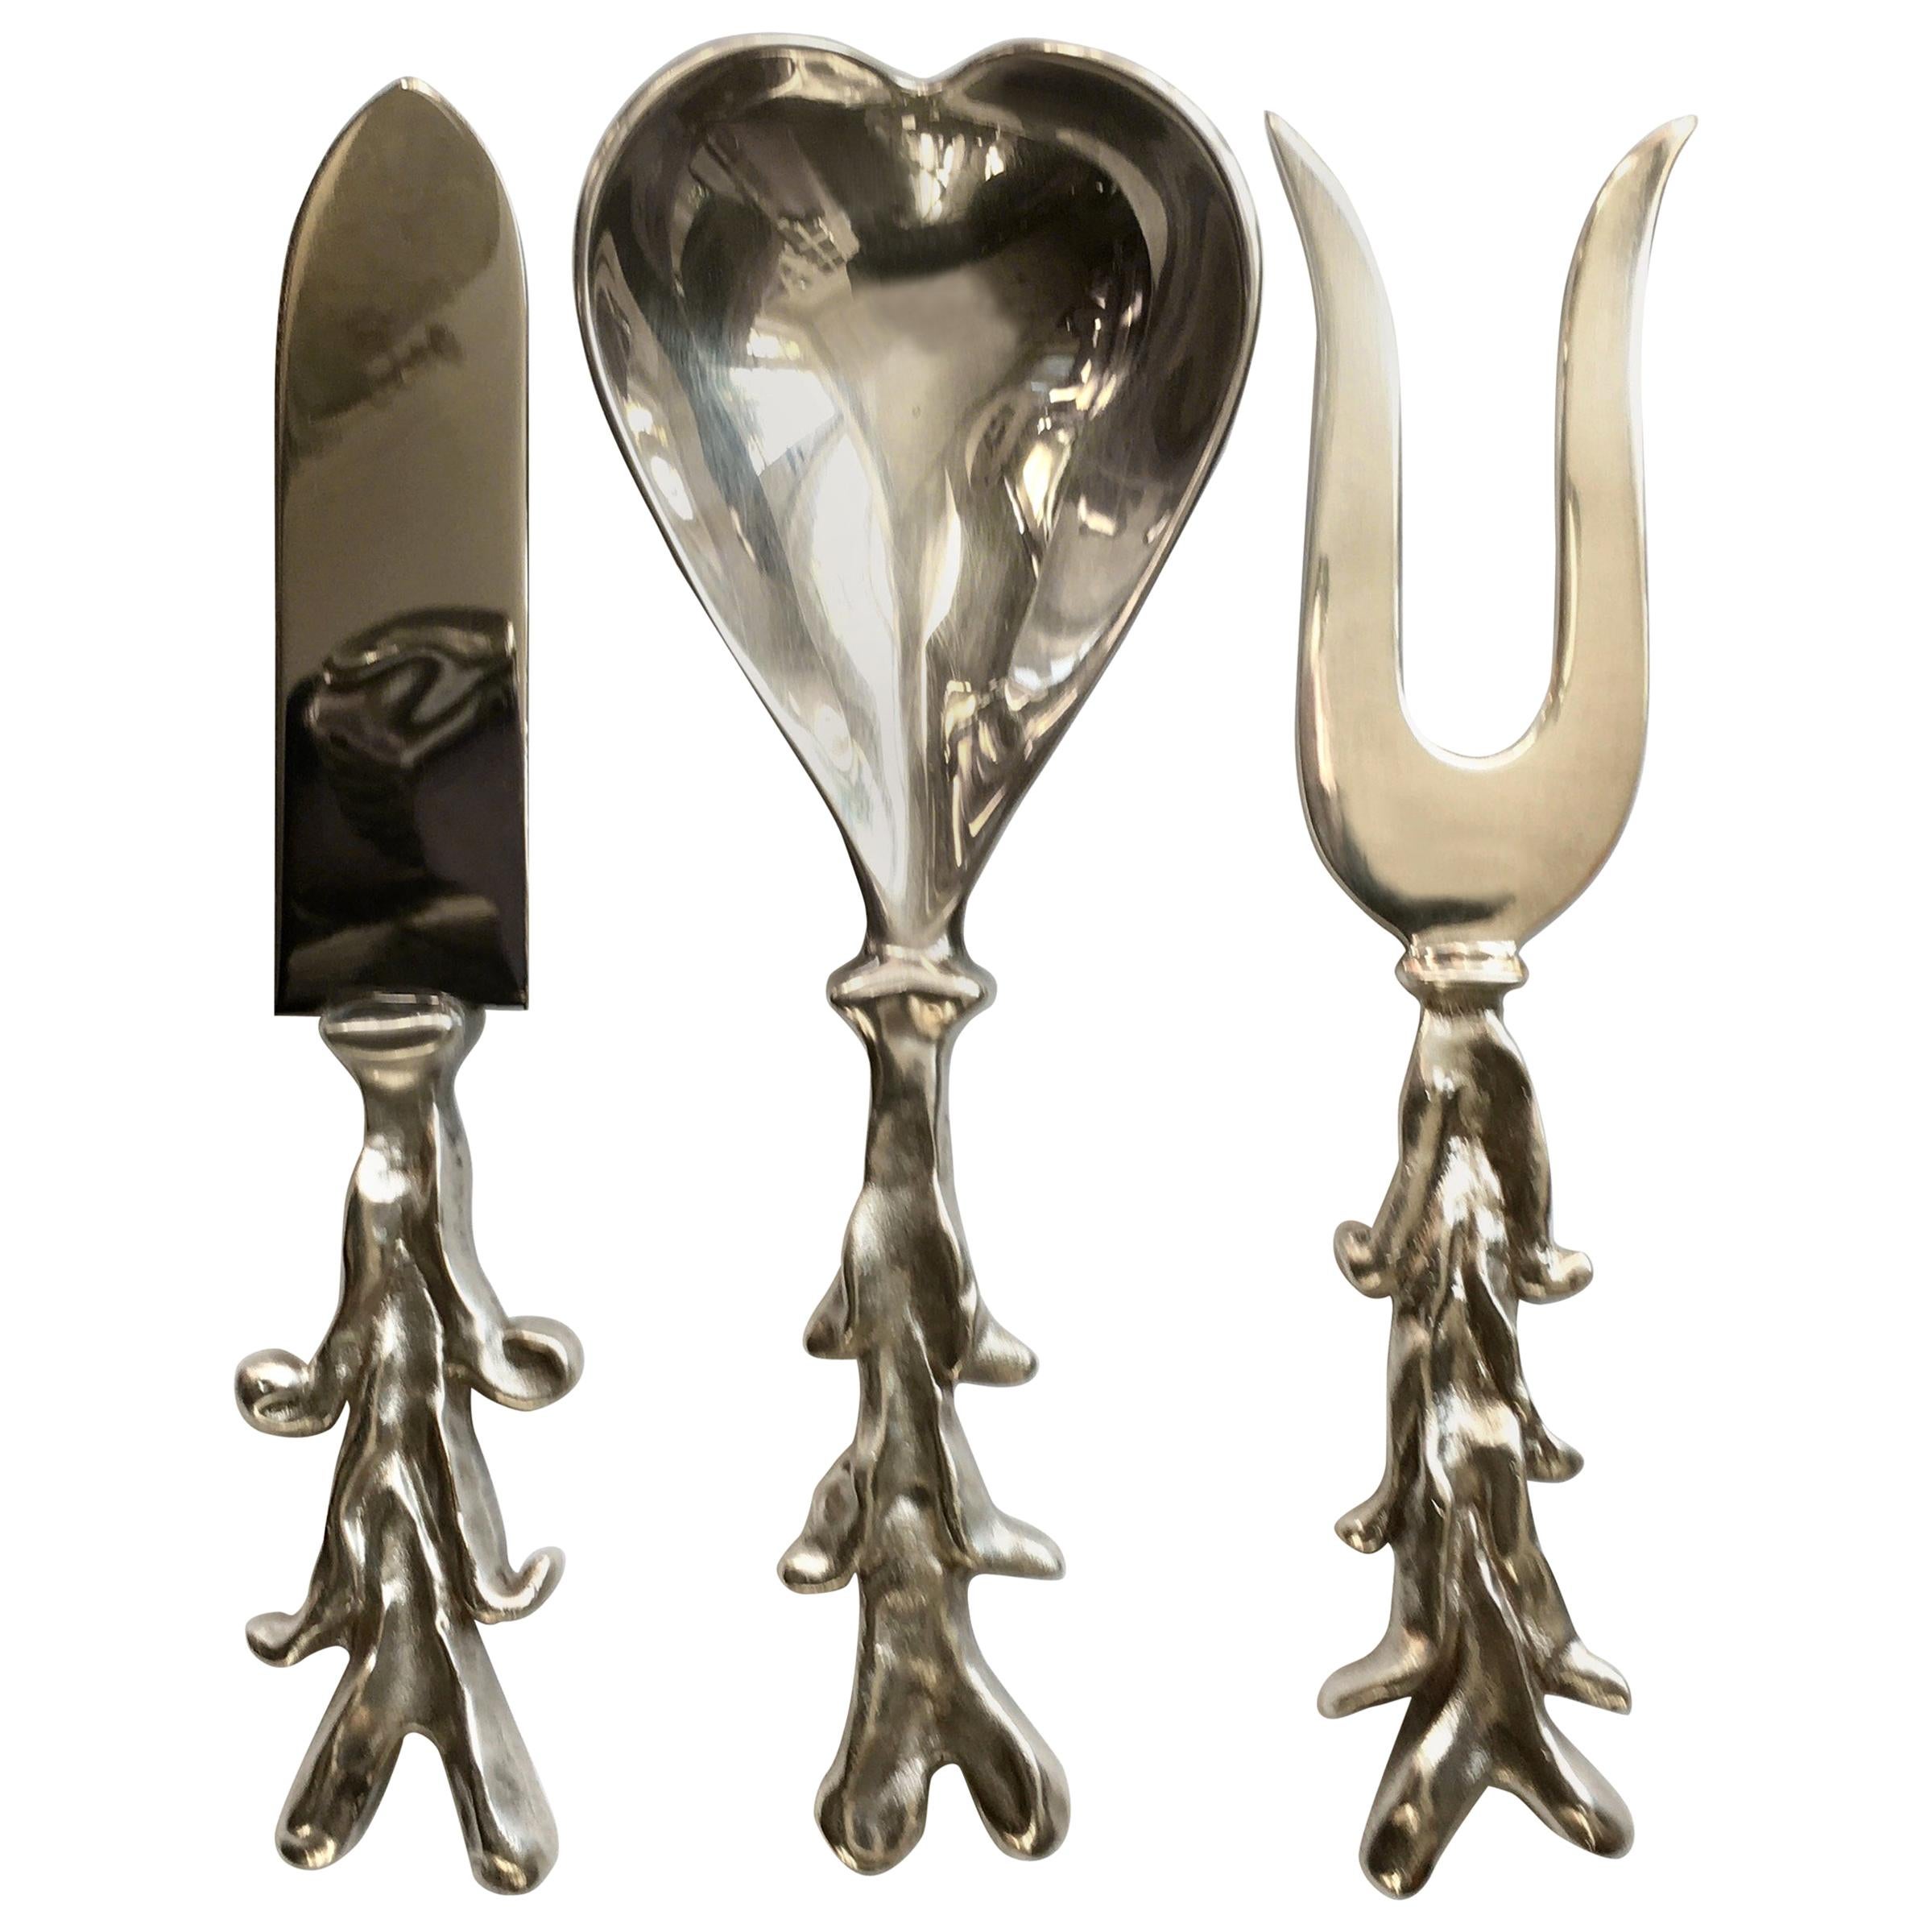 Michael Aram Silver Plate Serving Pieces I LOVE YOU Valentines Day Gift